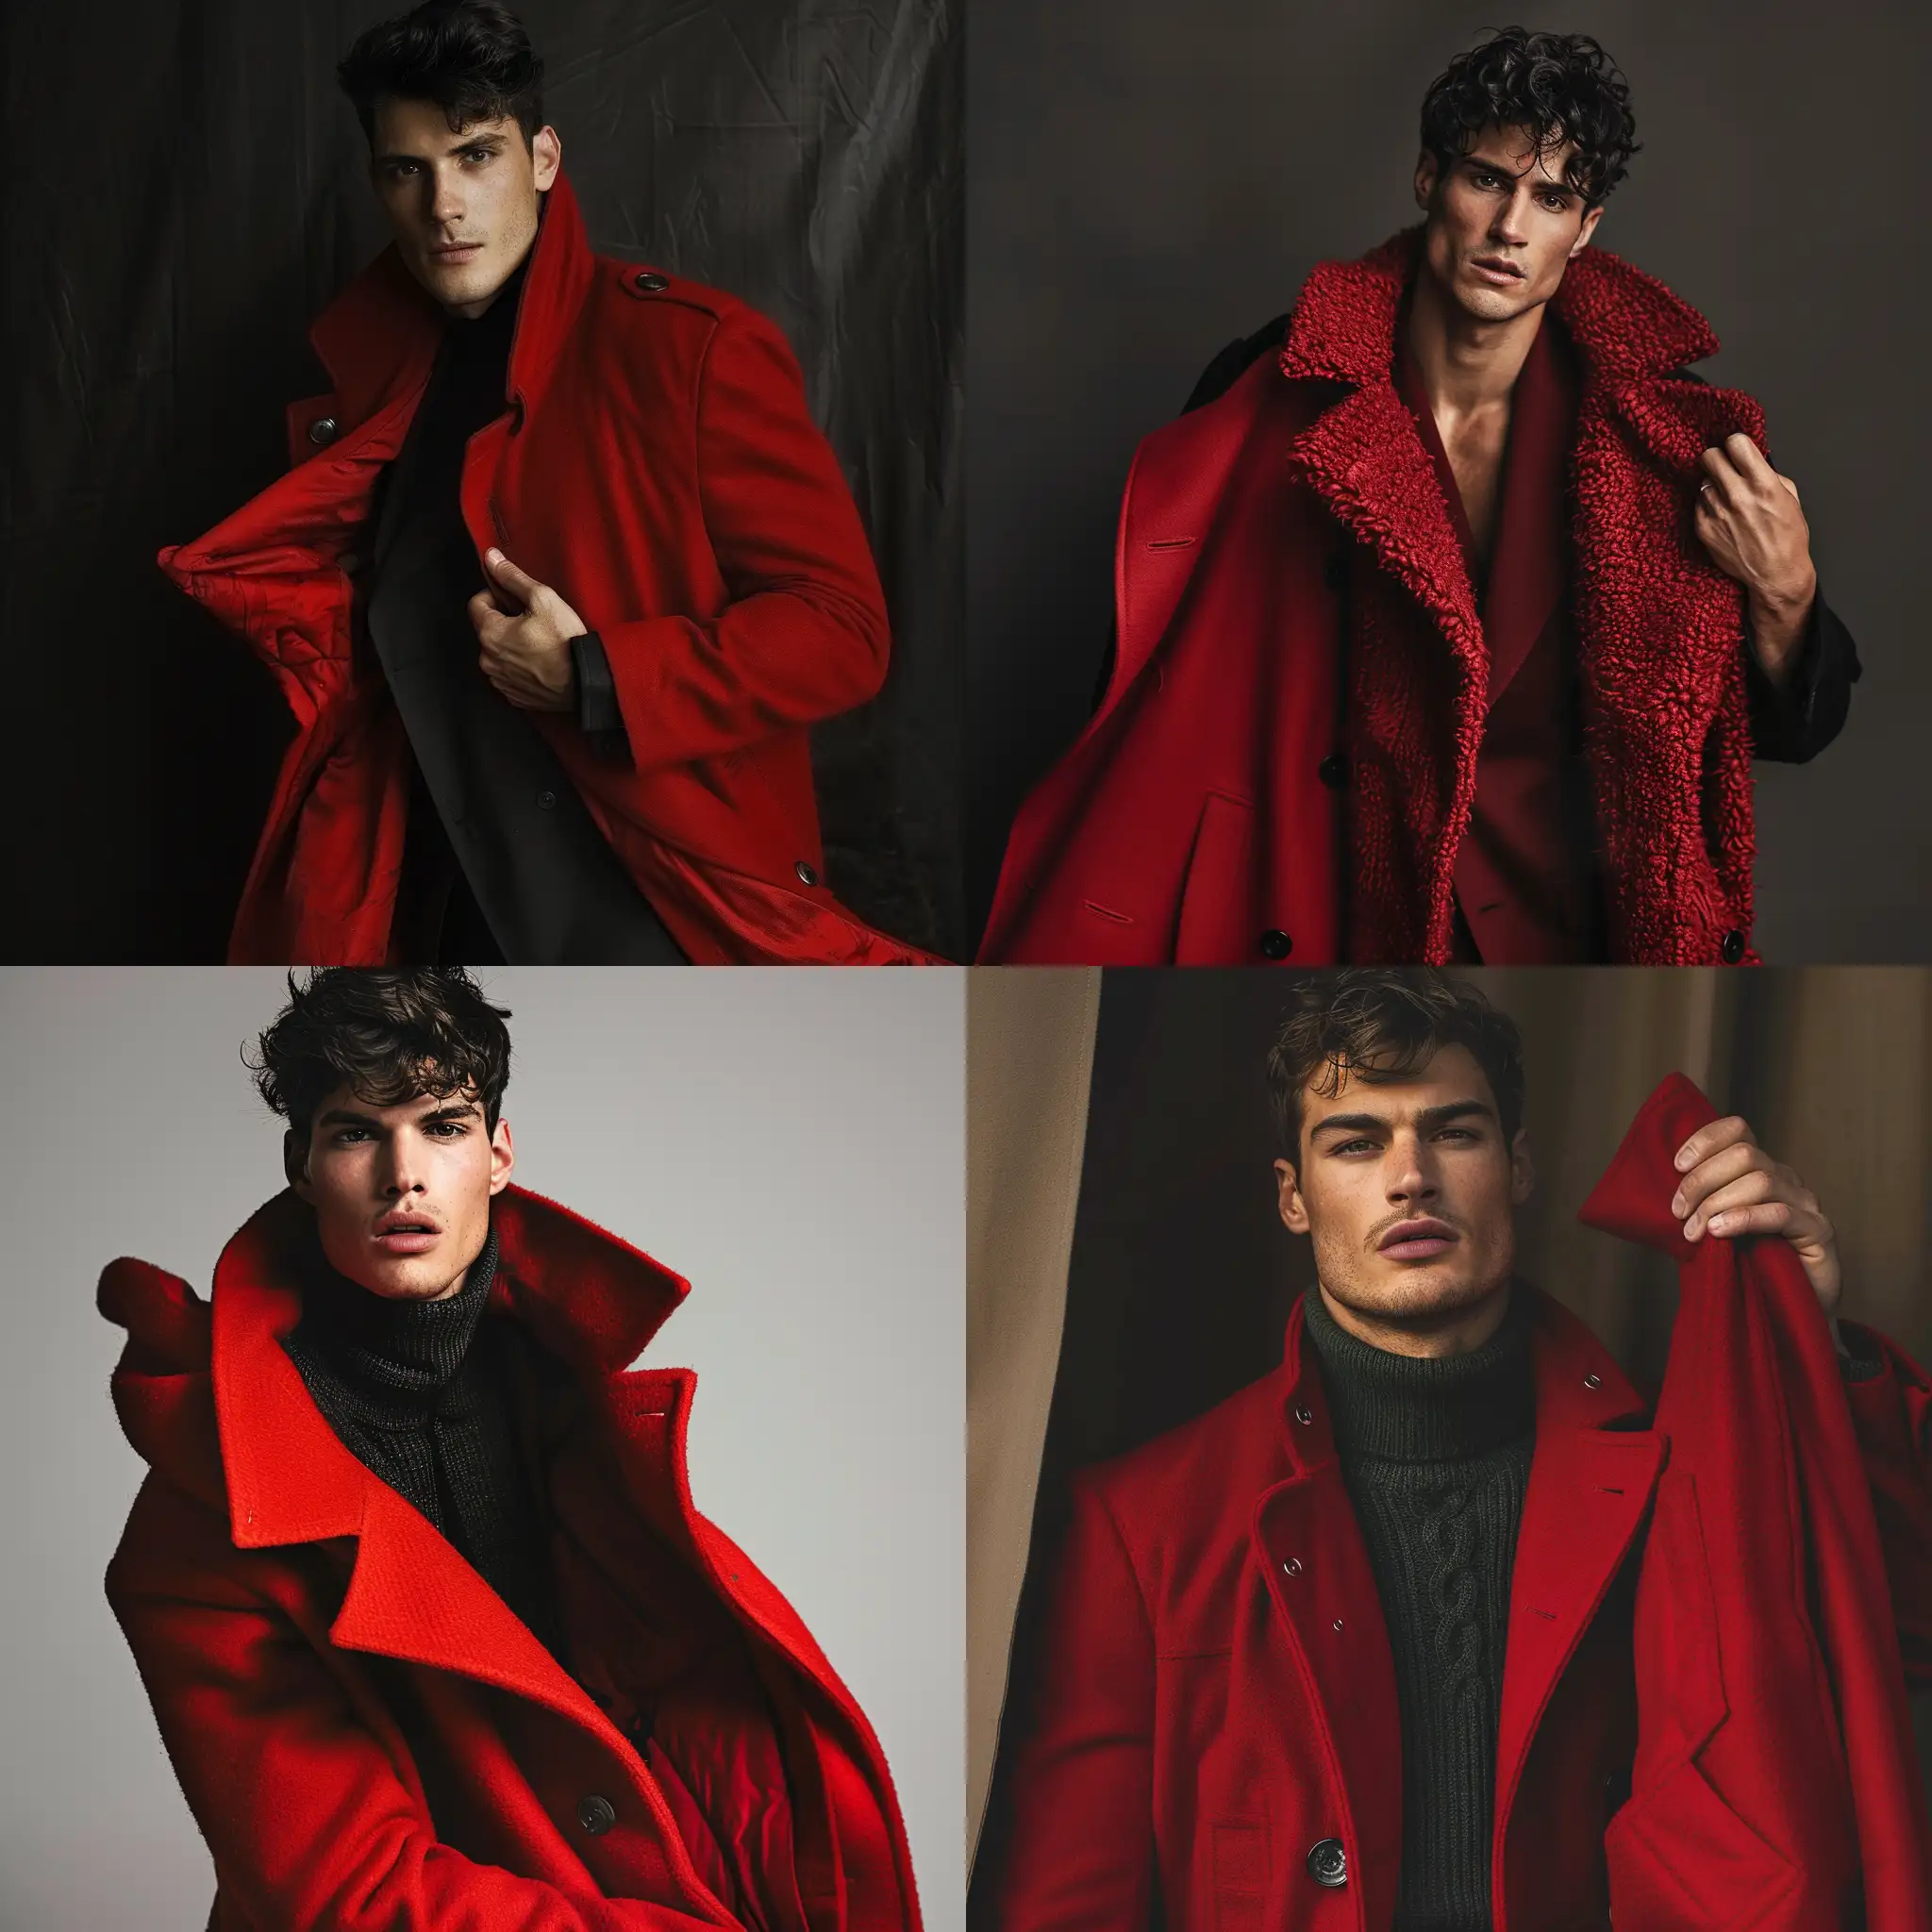 Fashion-Portrait-of-a-Man-in-Red-Coat-Inspired-by-Dominique-Torettos-Style